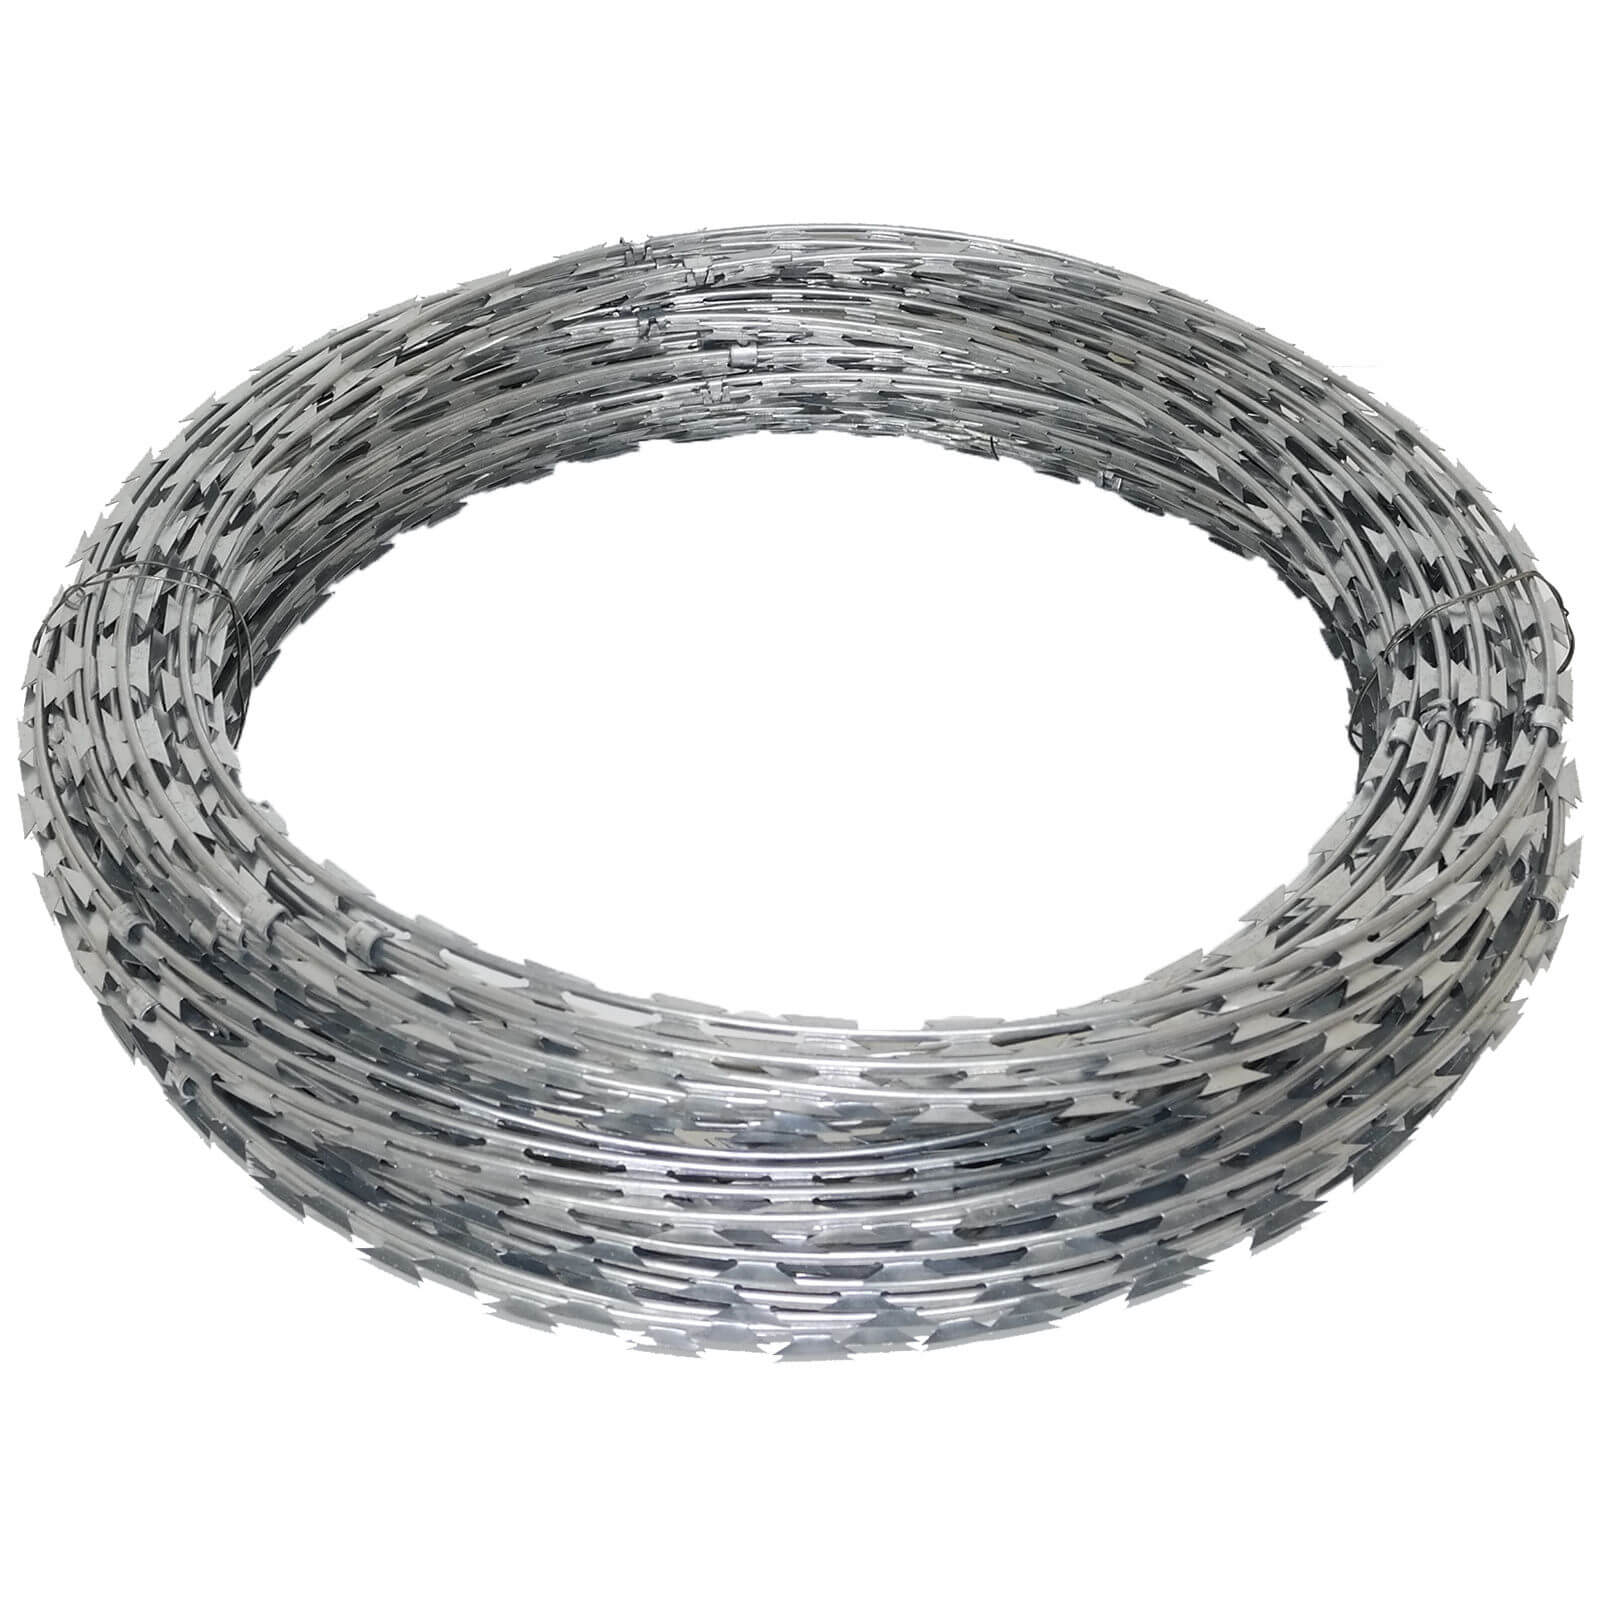 Razor Wire Coil: Ensuring Safety and Security